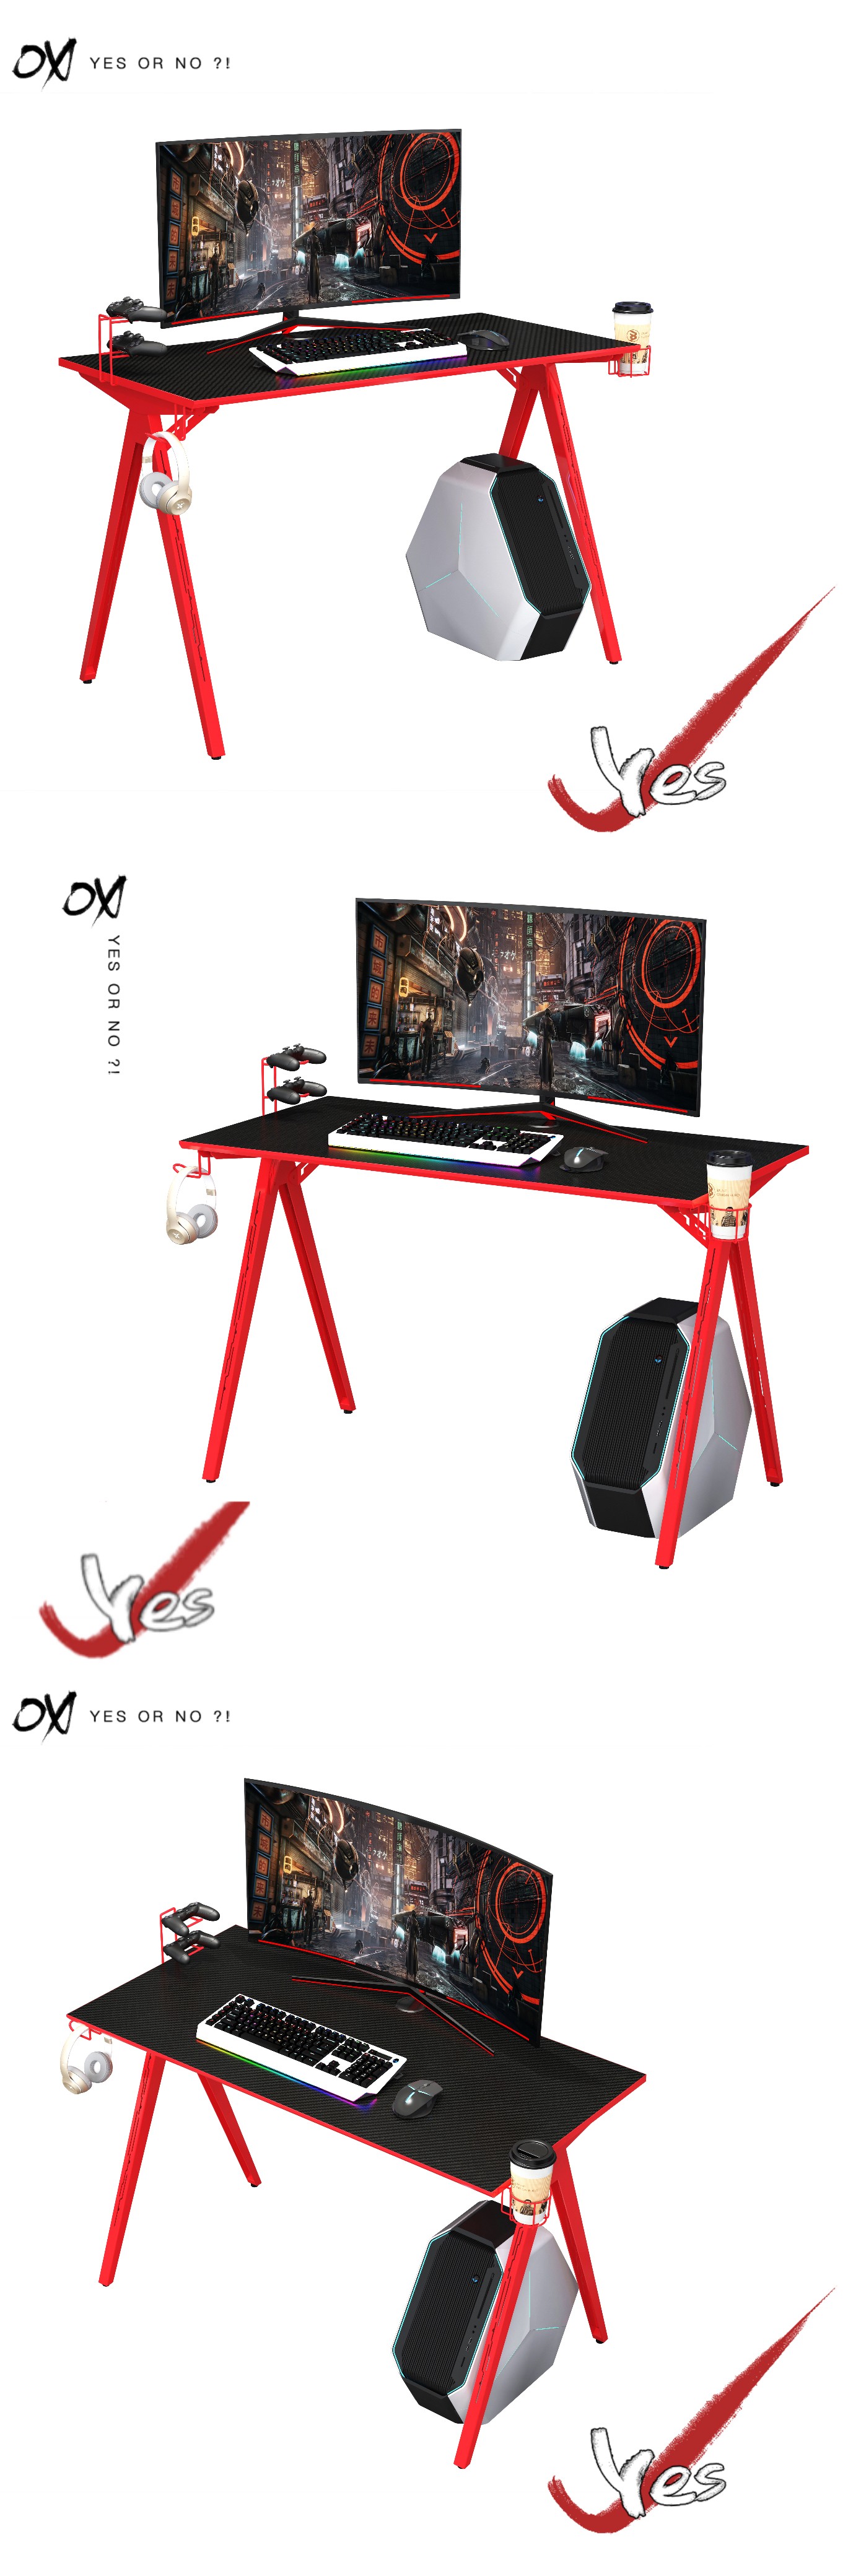 Black with Red e-sport racing style gamer table